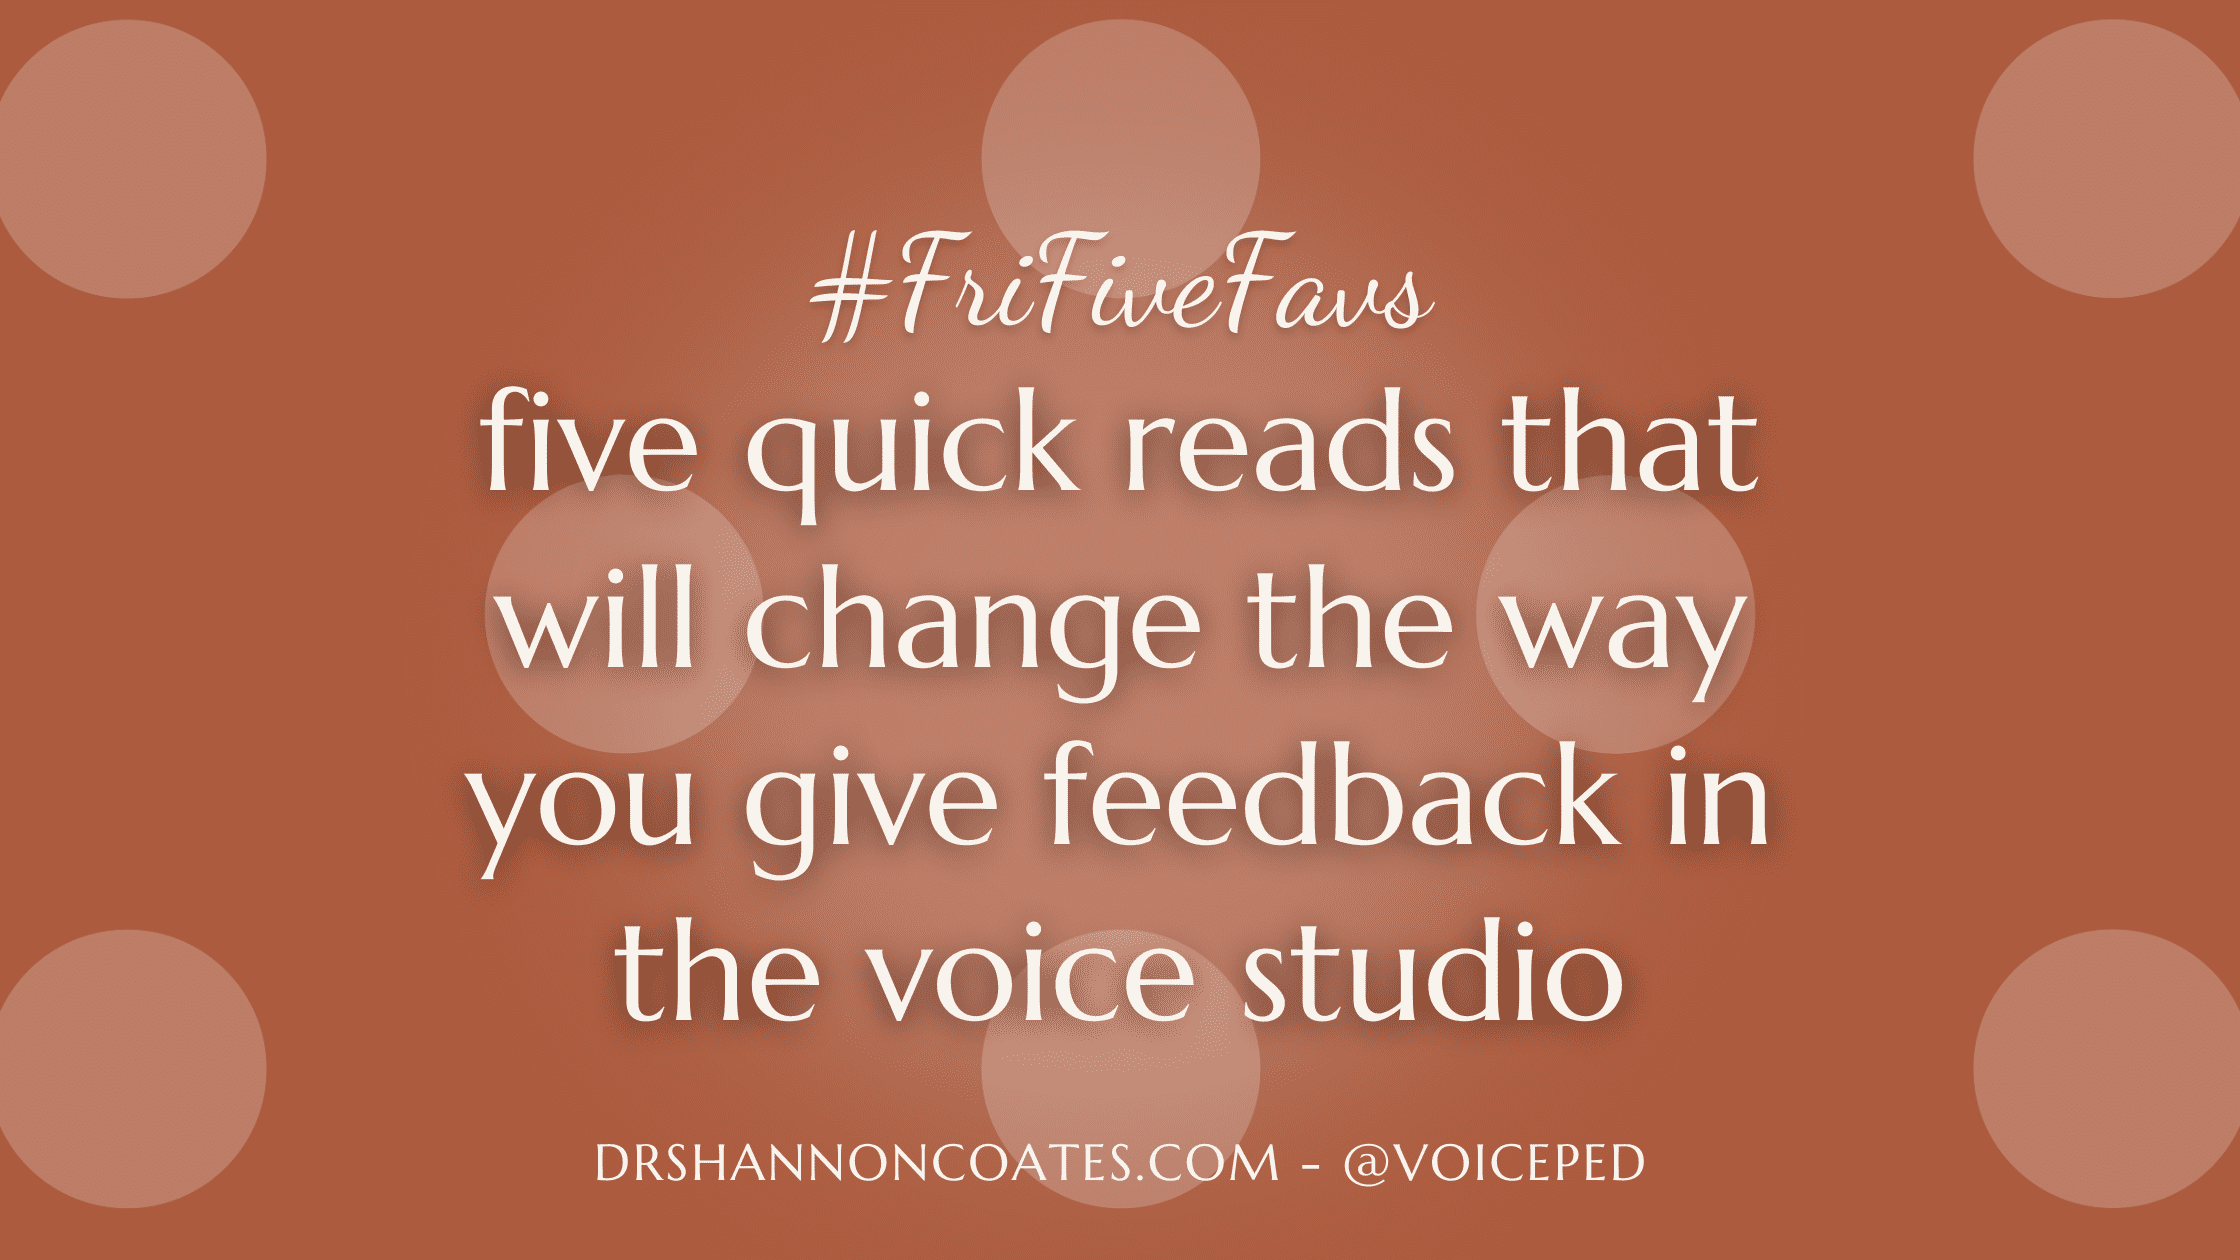 Five quick reads the will change the way you give feedback in the voice studio.